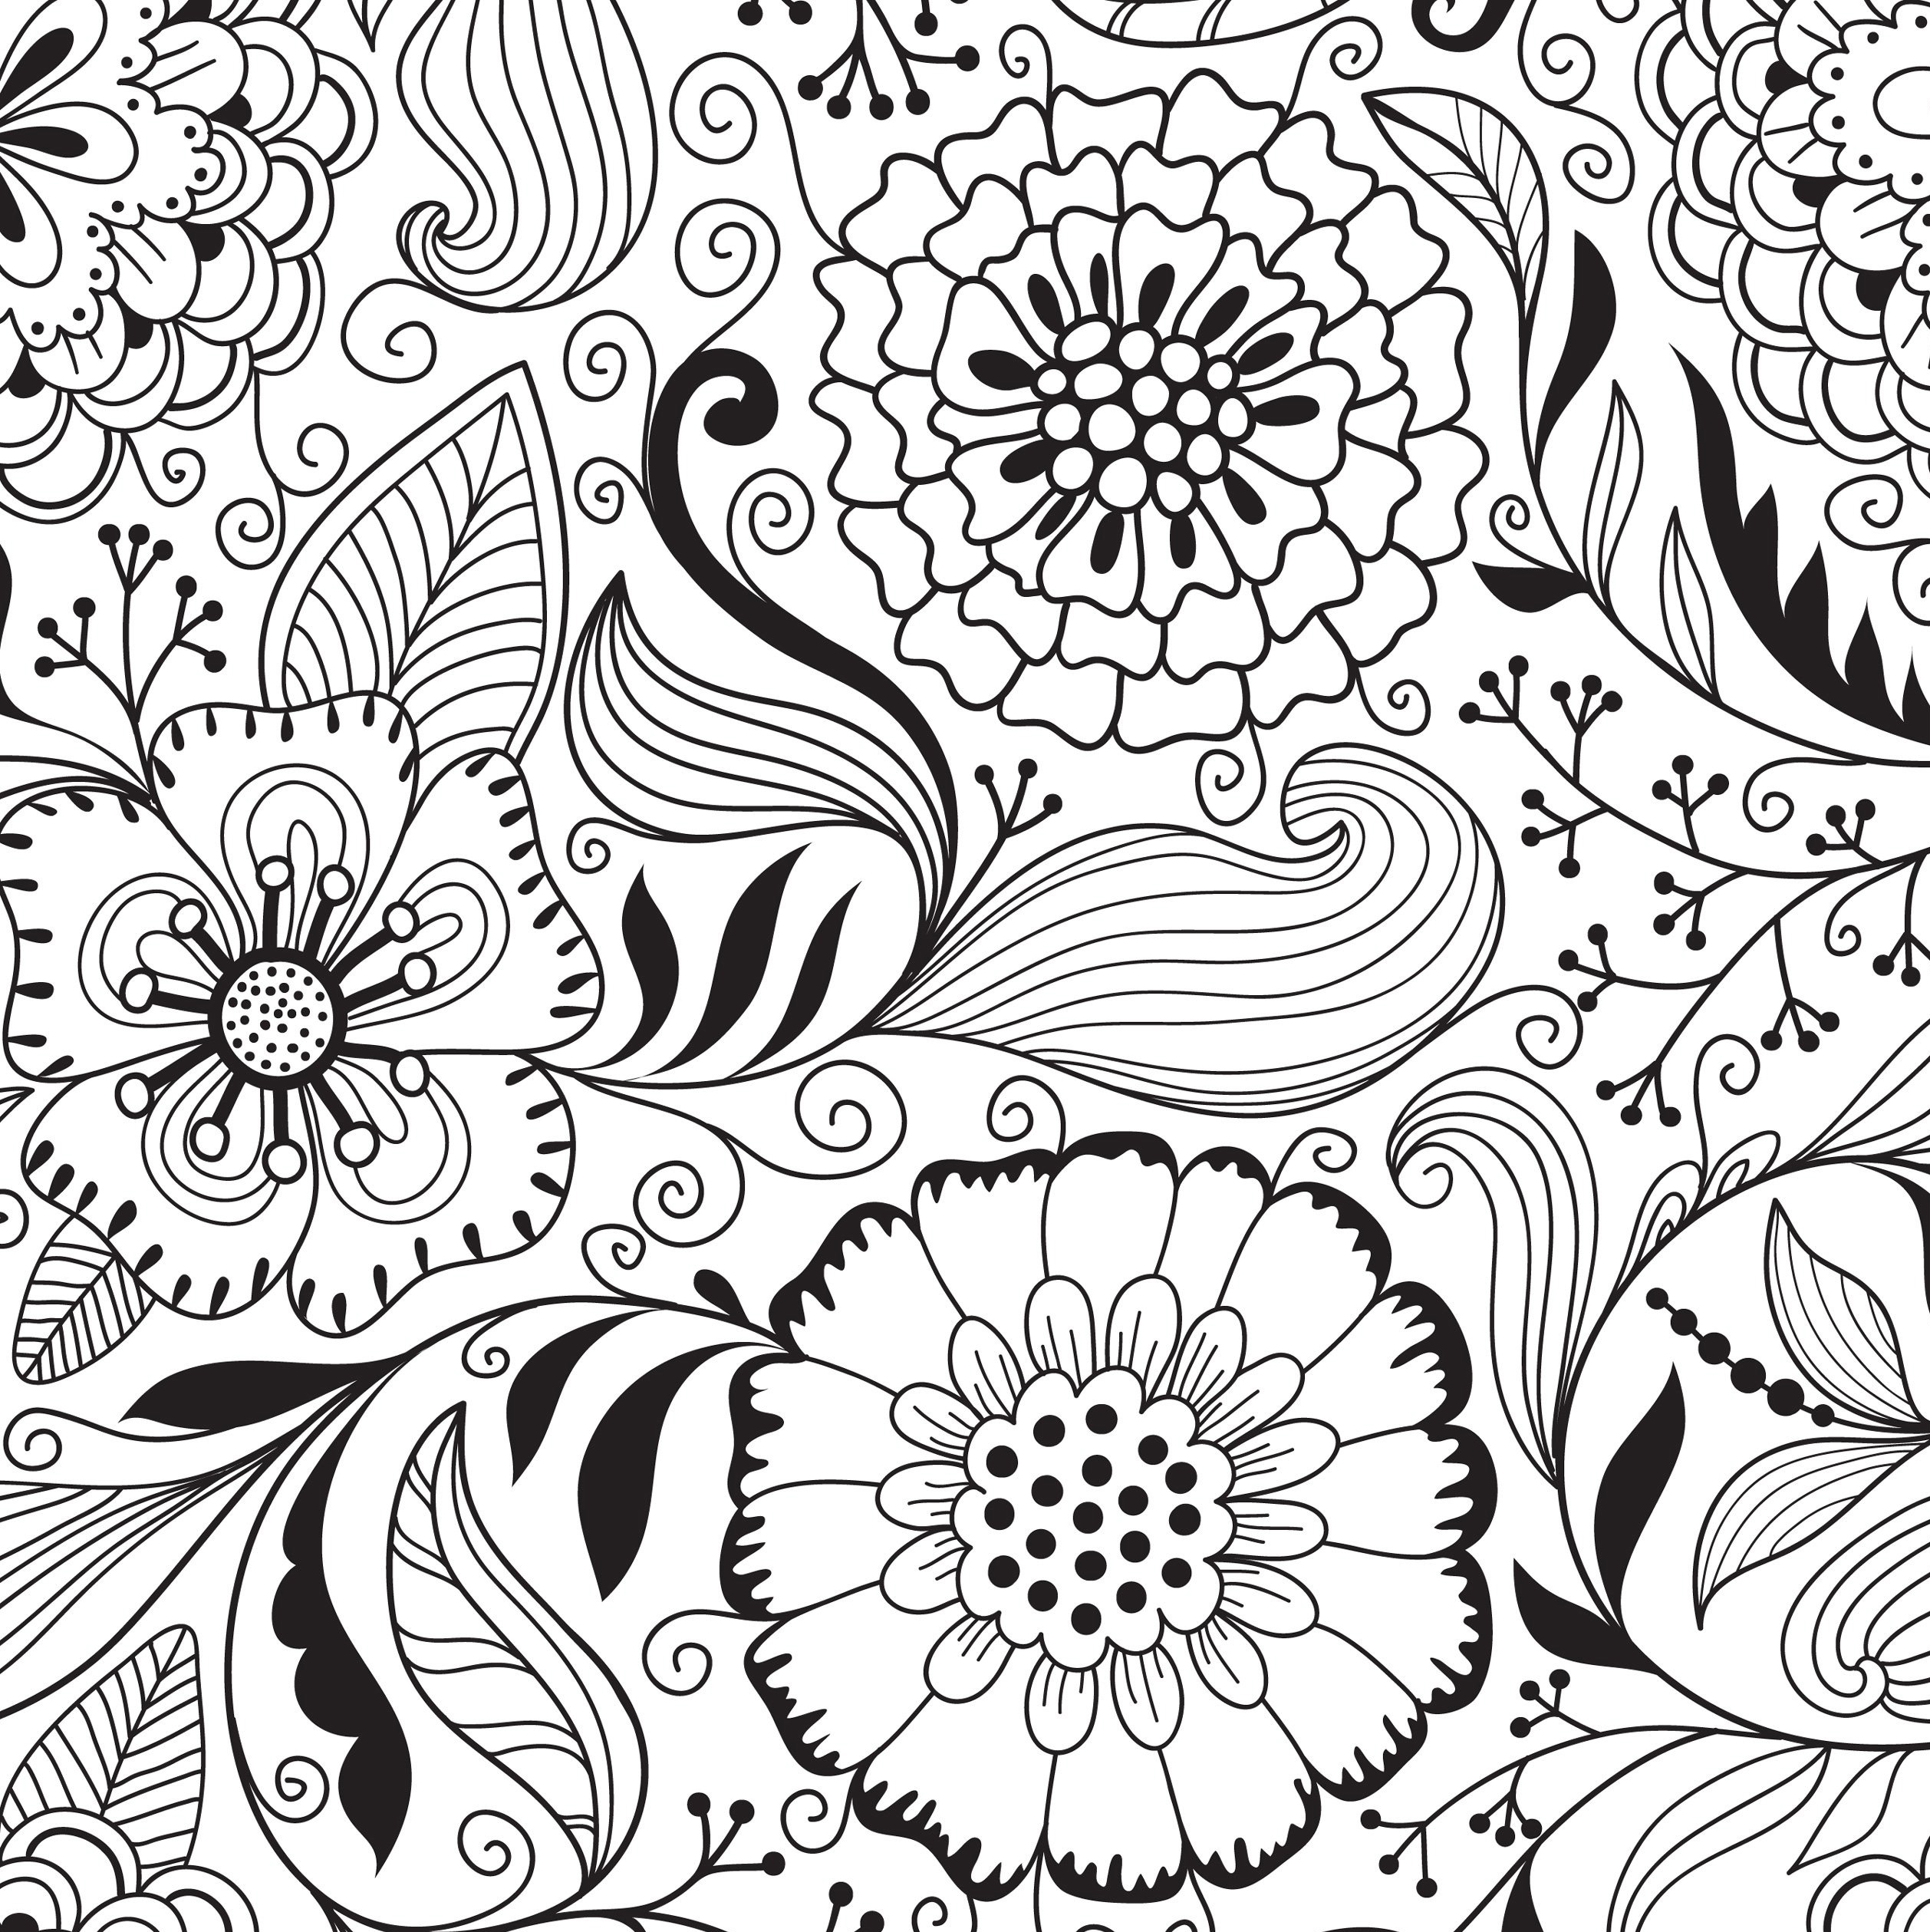 Adult Coloring Pages To Print - AeroGrafiaOnline